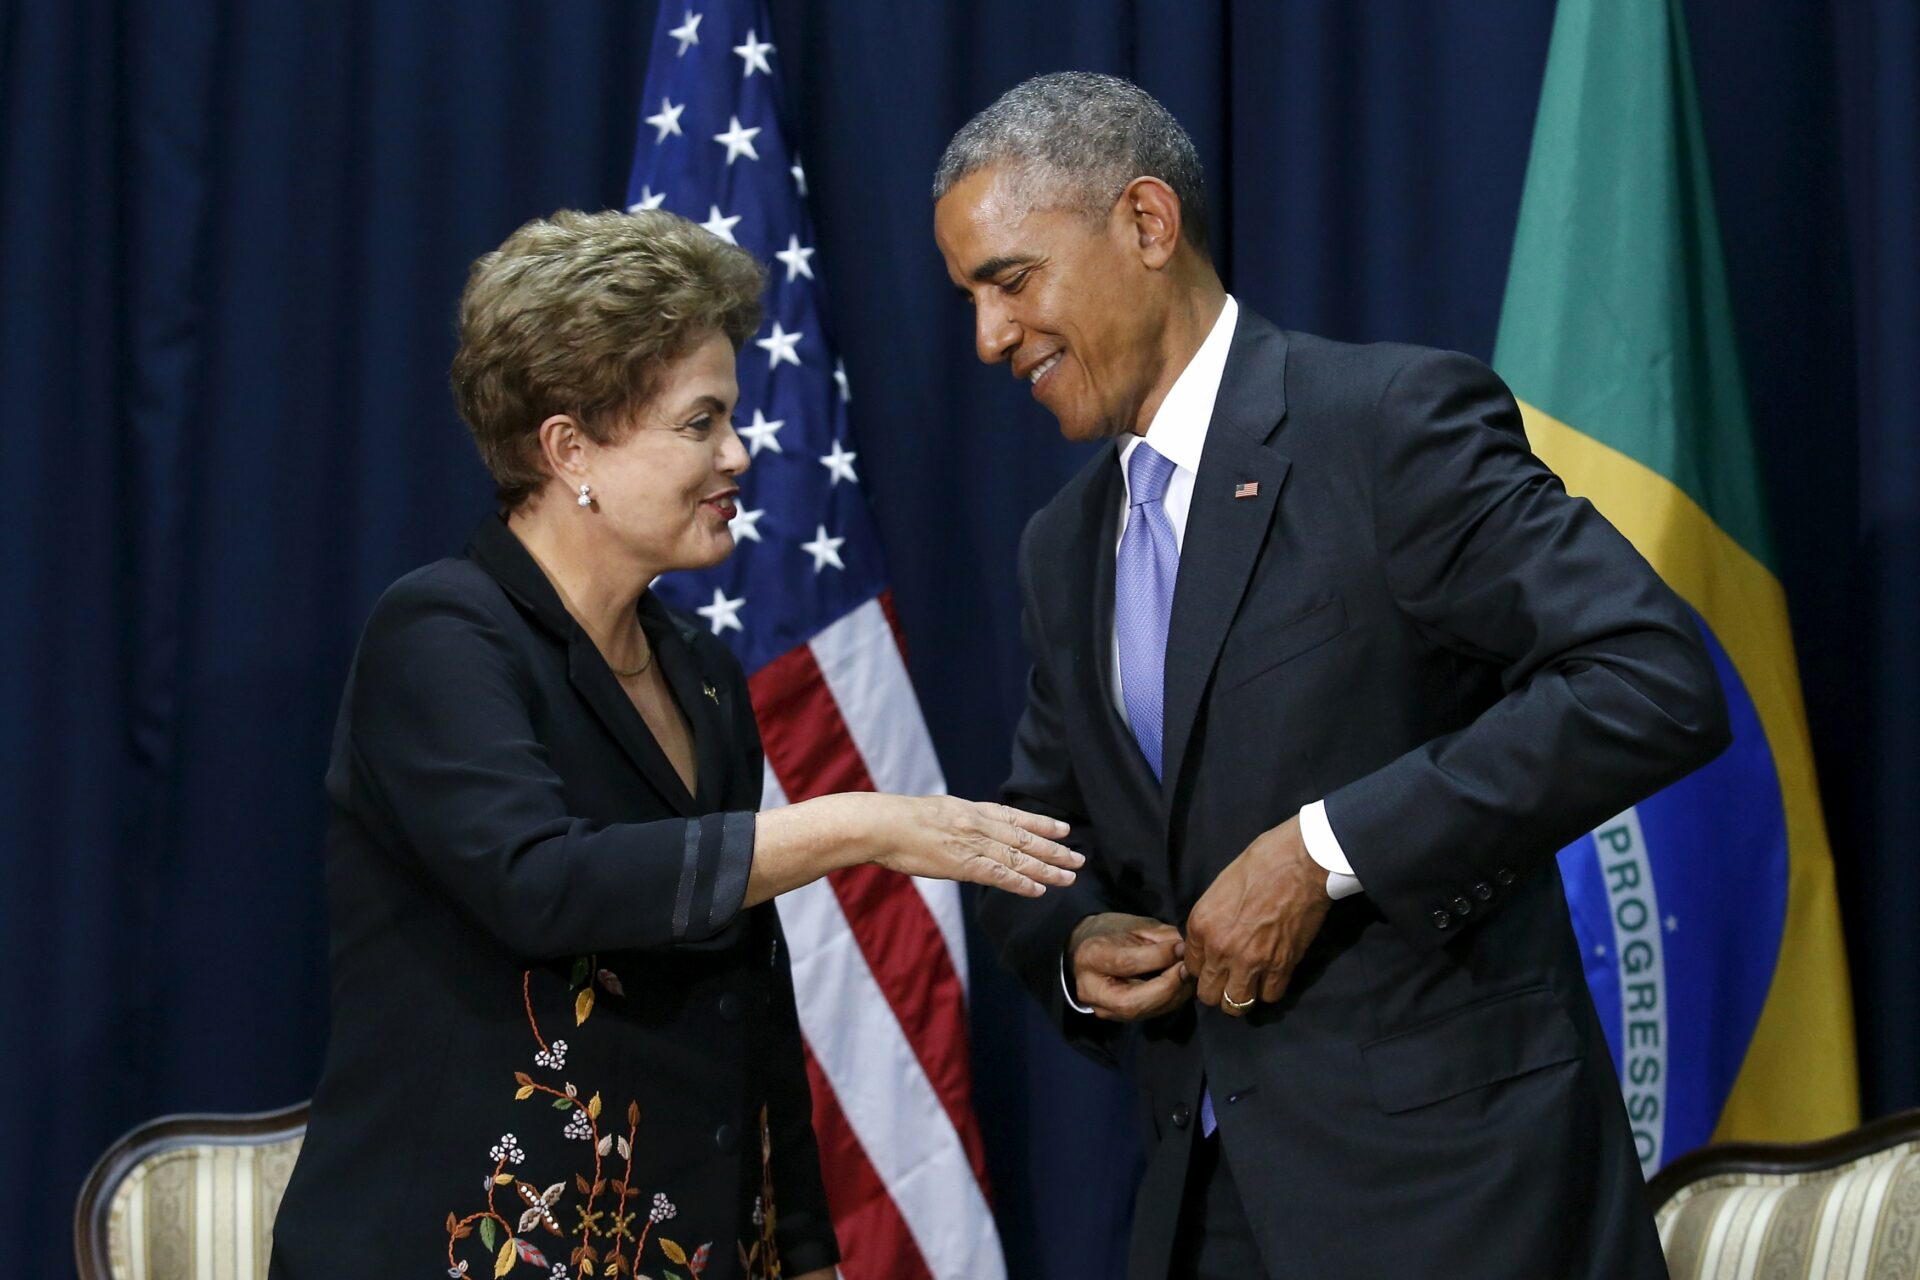 U.S. President Barack Obama hurries to button his jacket before shaking hands with Brazil's President Dilma Rousseff at their meeting during the Summit of the Americas in Panama City, Panama April 11, 2015. REUTERS/Jonathan Ernst